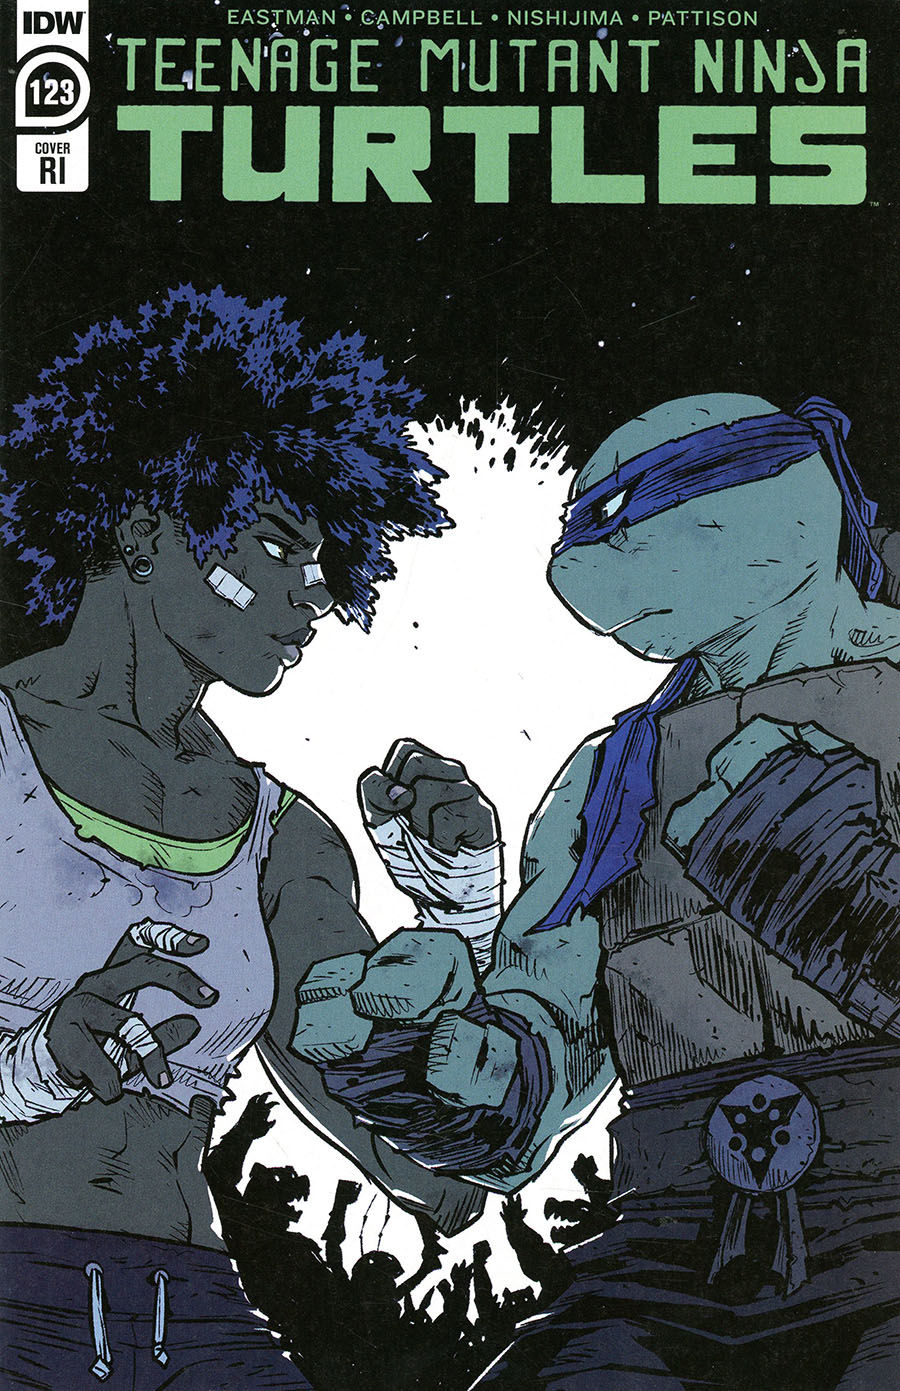 Teenage Mutant Ninja Turtles Vol 5 #123 Cover C Incentive Sophie Campbell Variant Cover